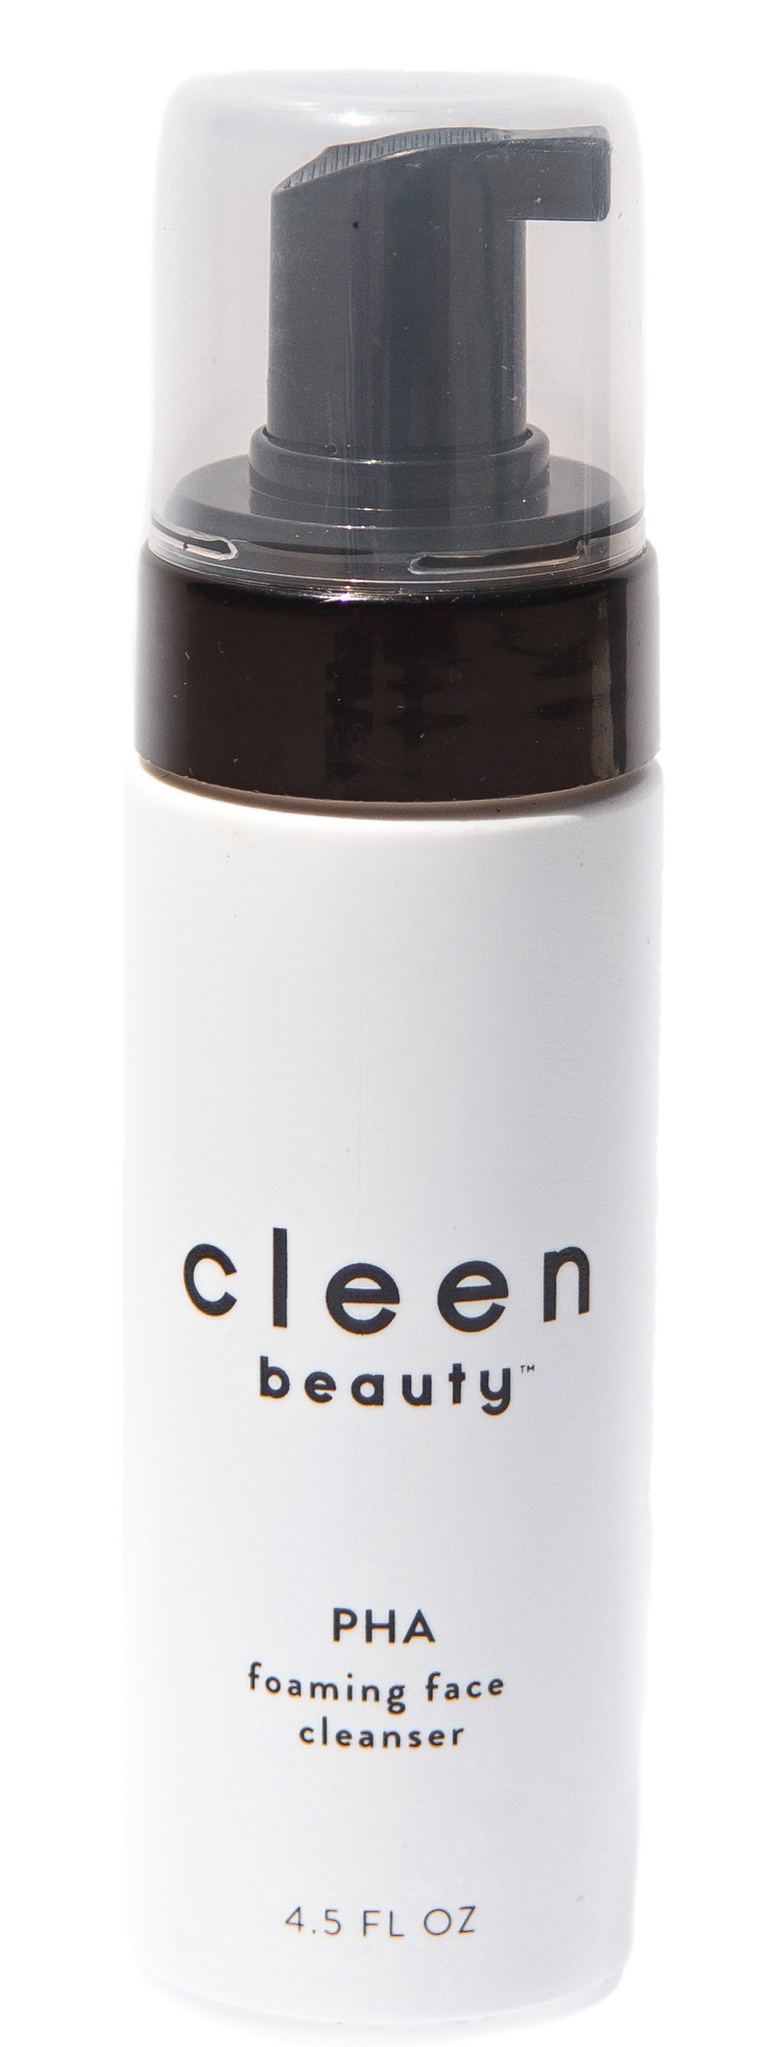 cleen beauty PHA Foaming Face Cleanser